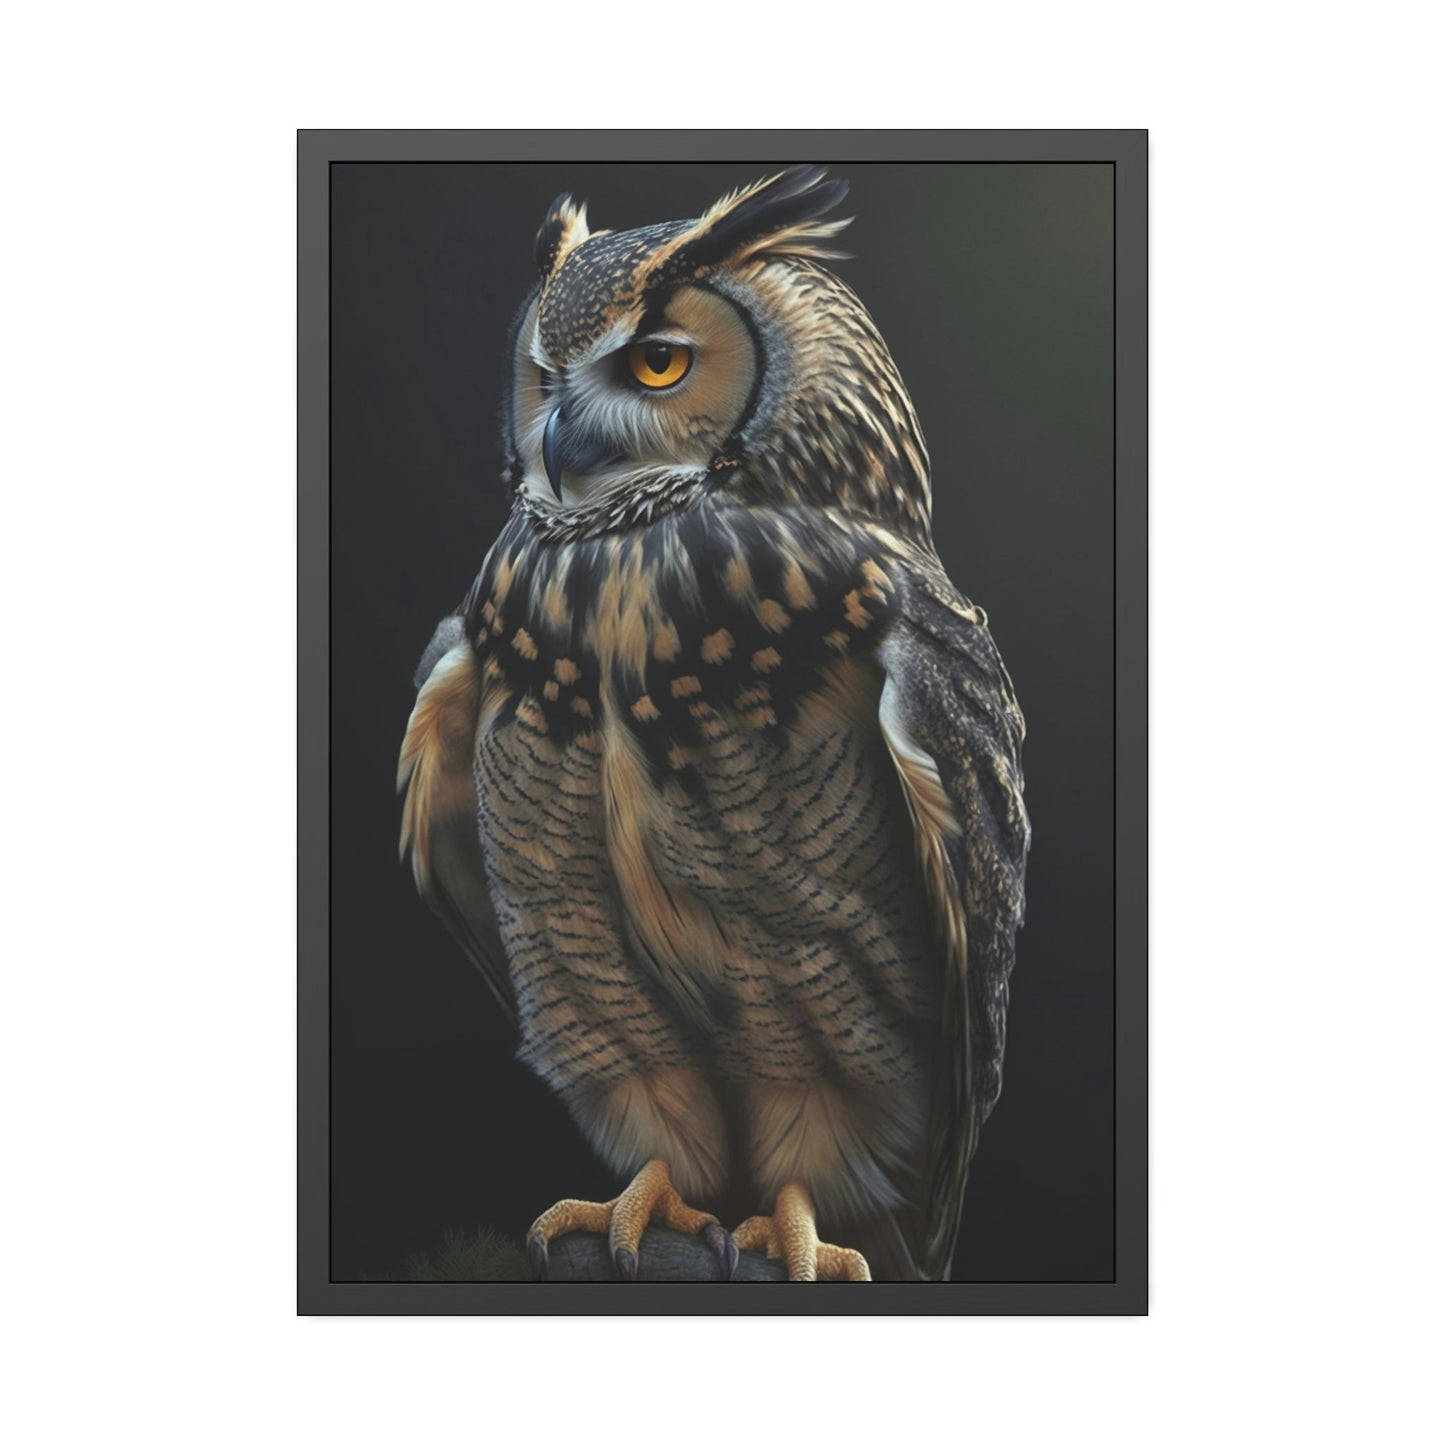 Majestic Hunter: An Artistic Depiction of an Owl on Canvas